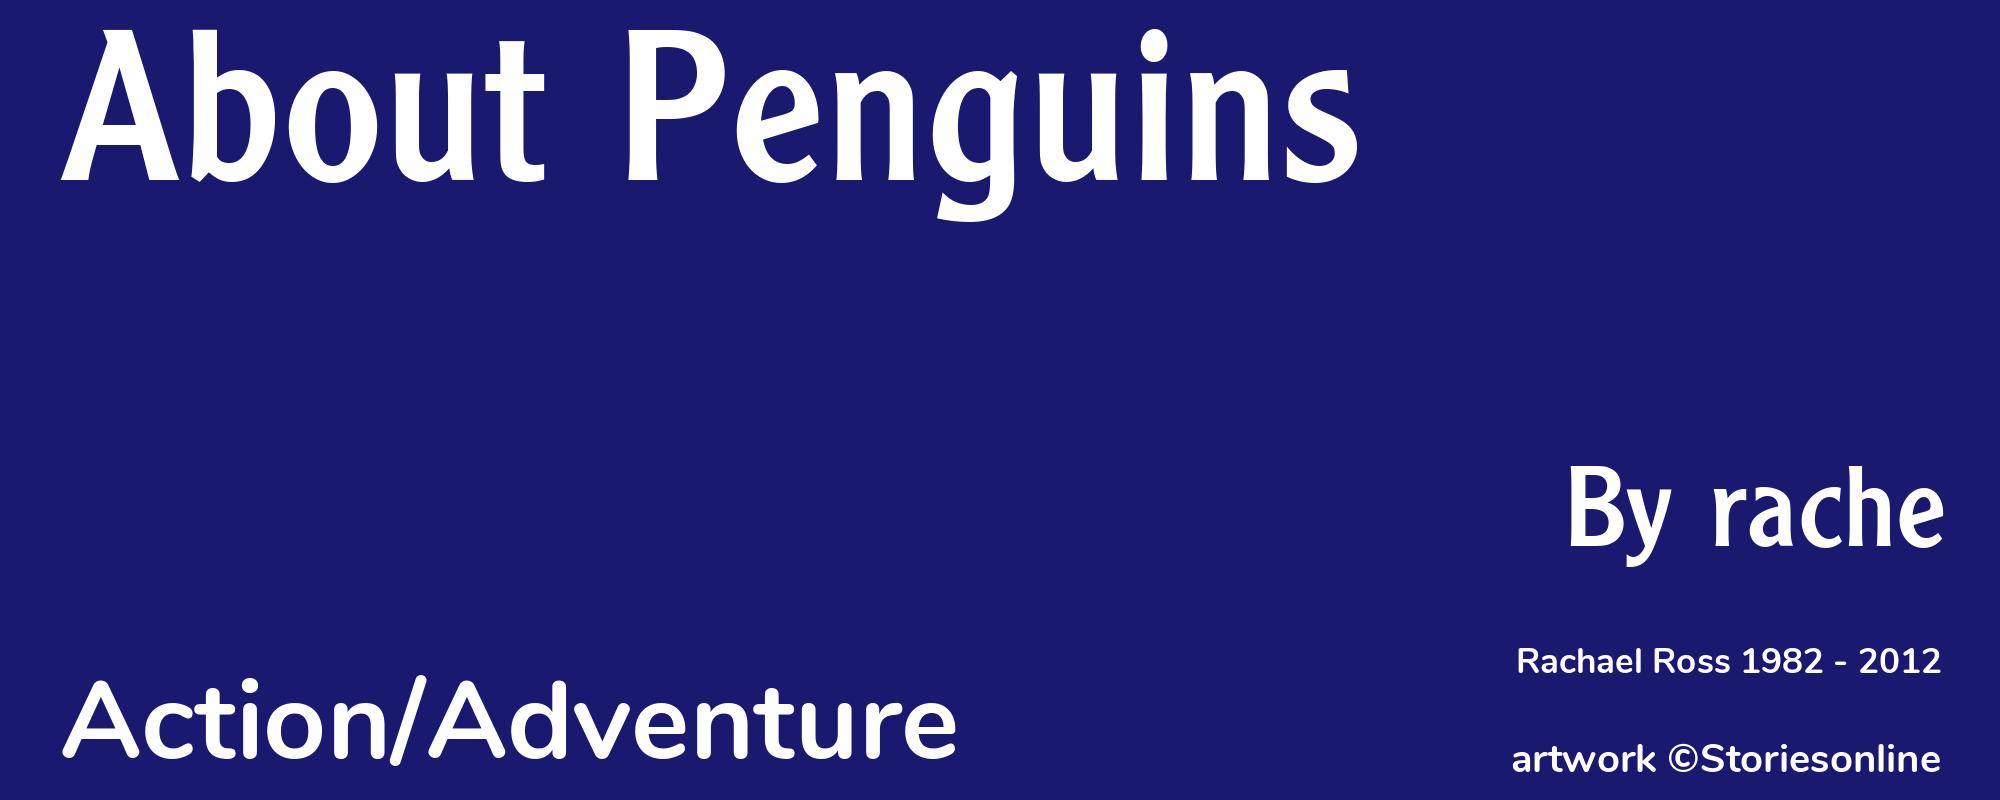 About Penguins - Cover